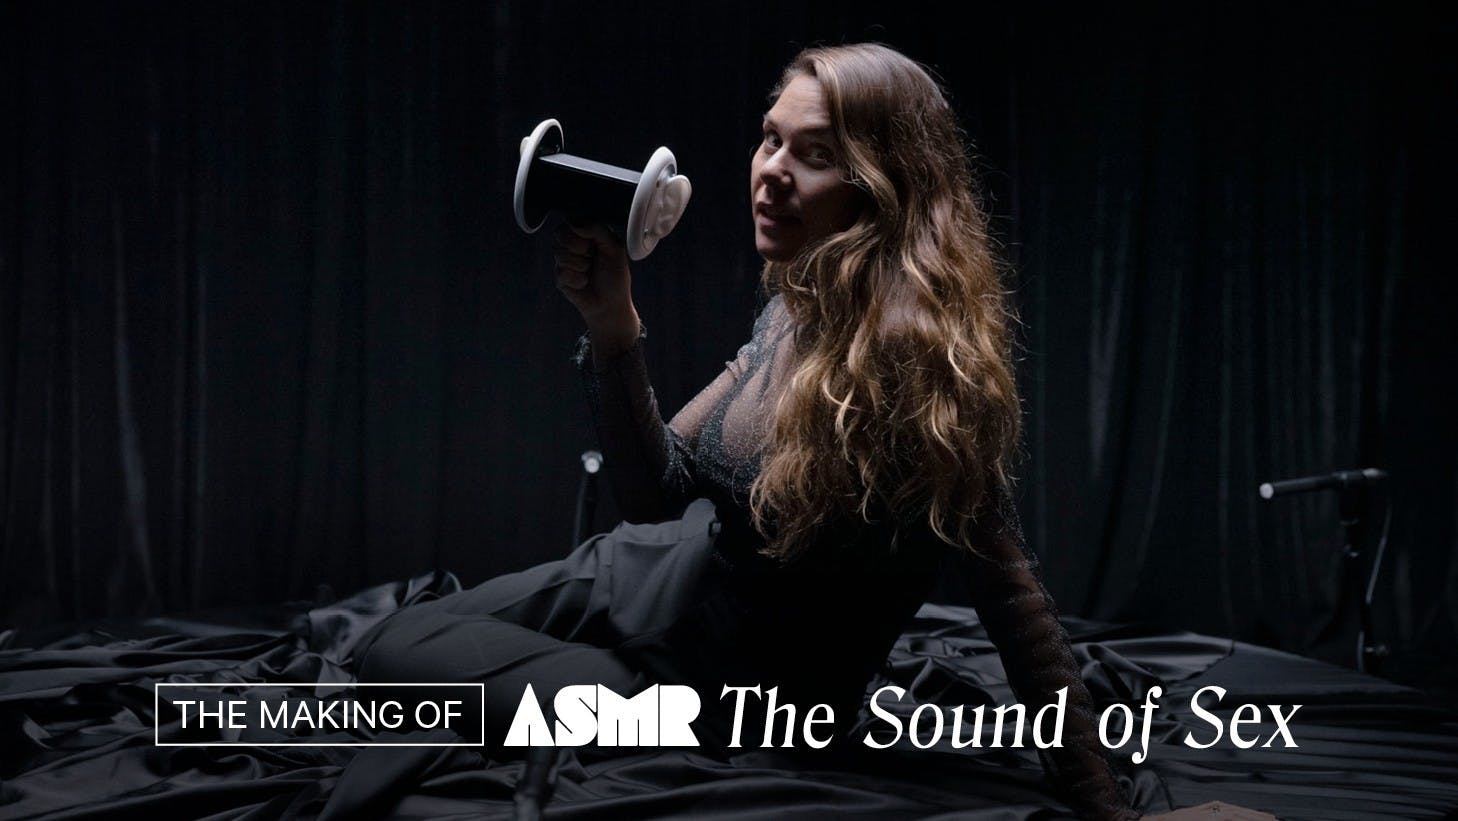 Behind The Scenes ASMR: The Sound of Sex by Erika Lust